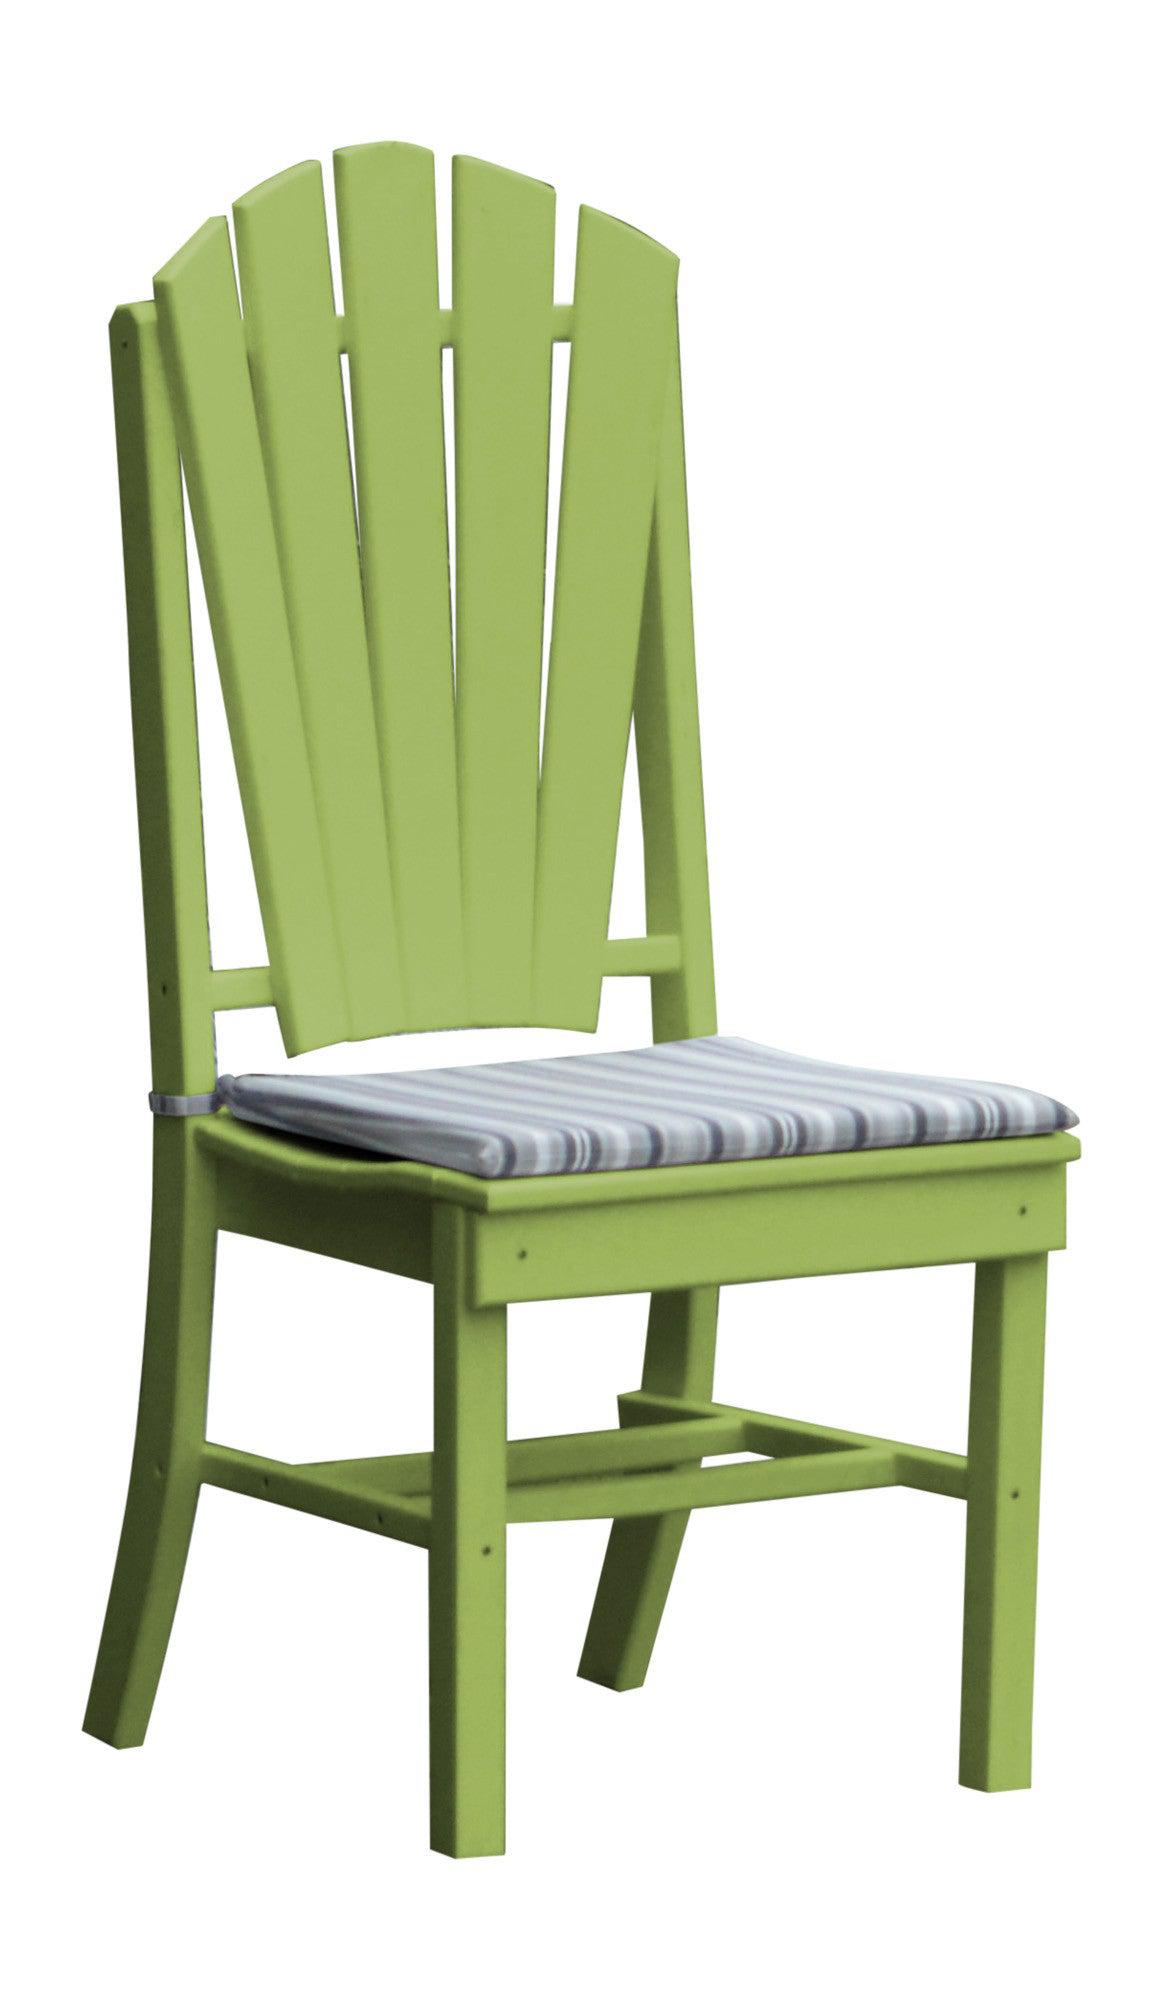 A&L Furniture Company Recycled Plastic Adirondack Dining Chair - Topical Lime